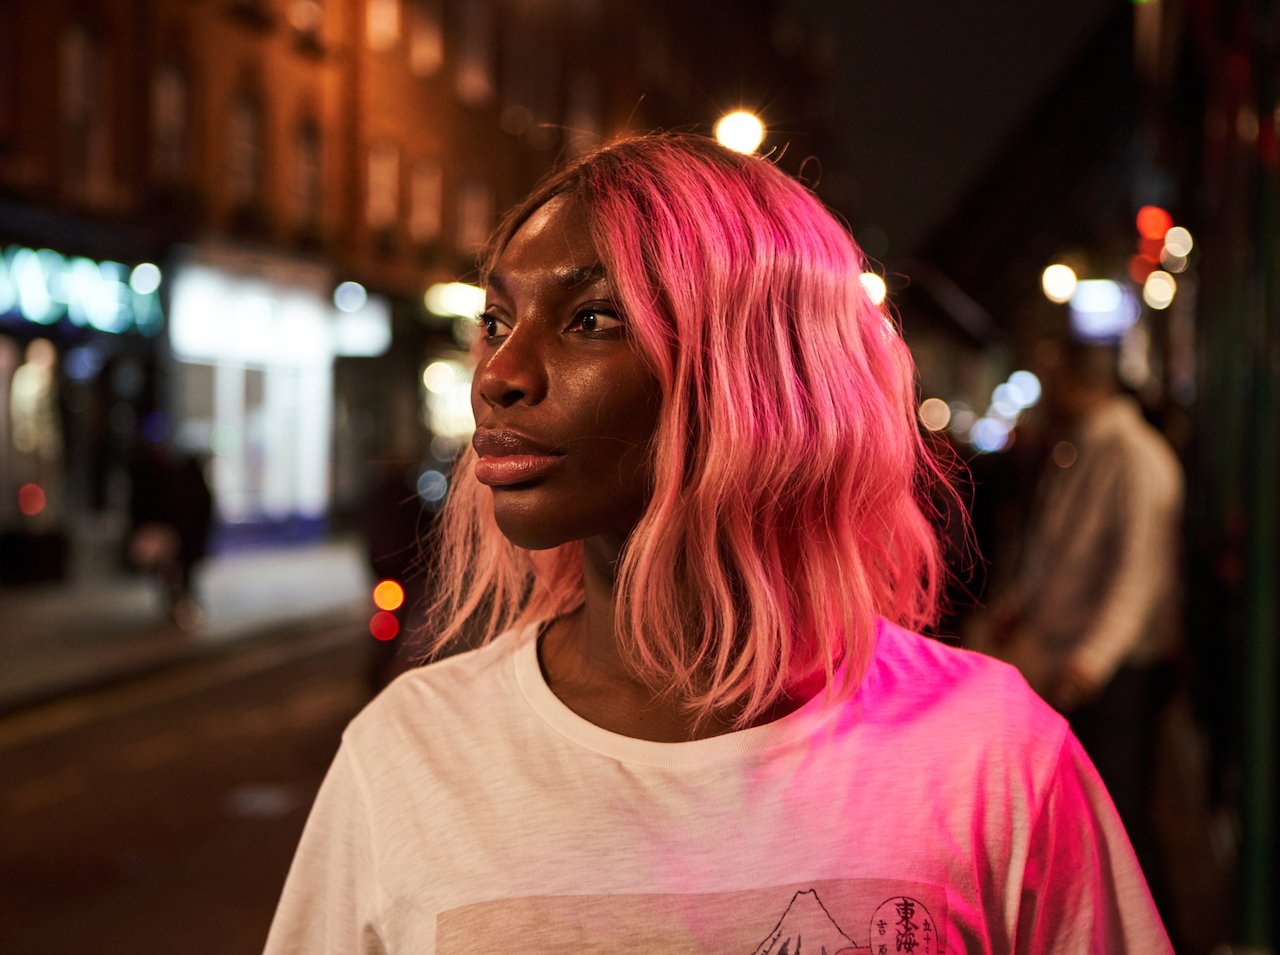 A photo of actor and creator Michaela Coel, a black woman with pink hair, from 'I May Destroy You'